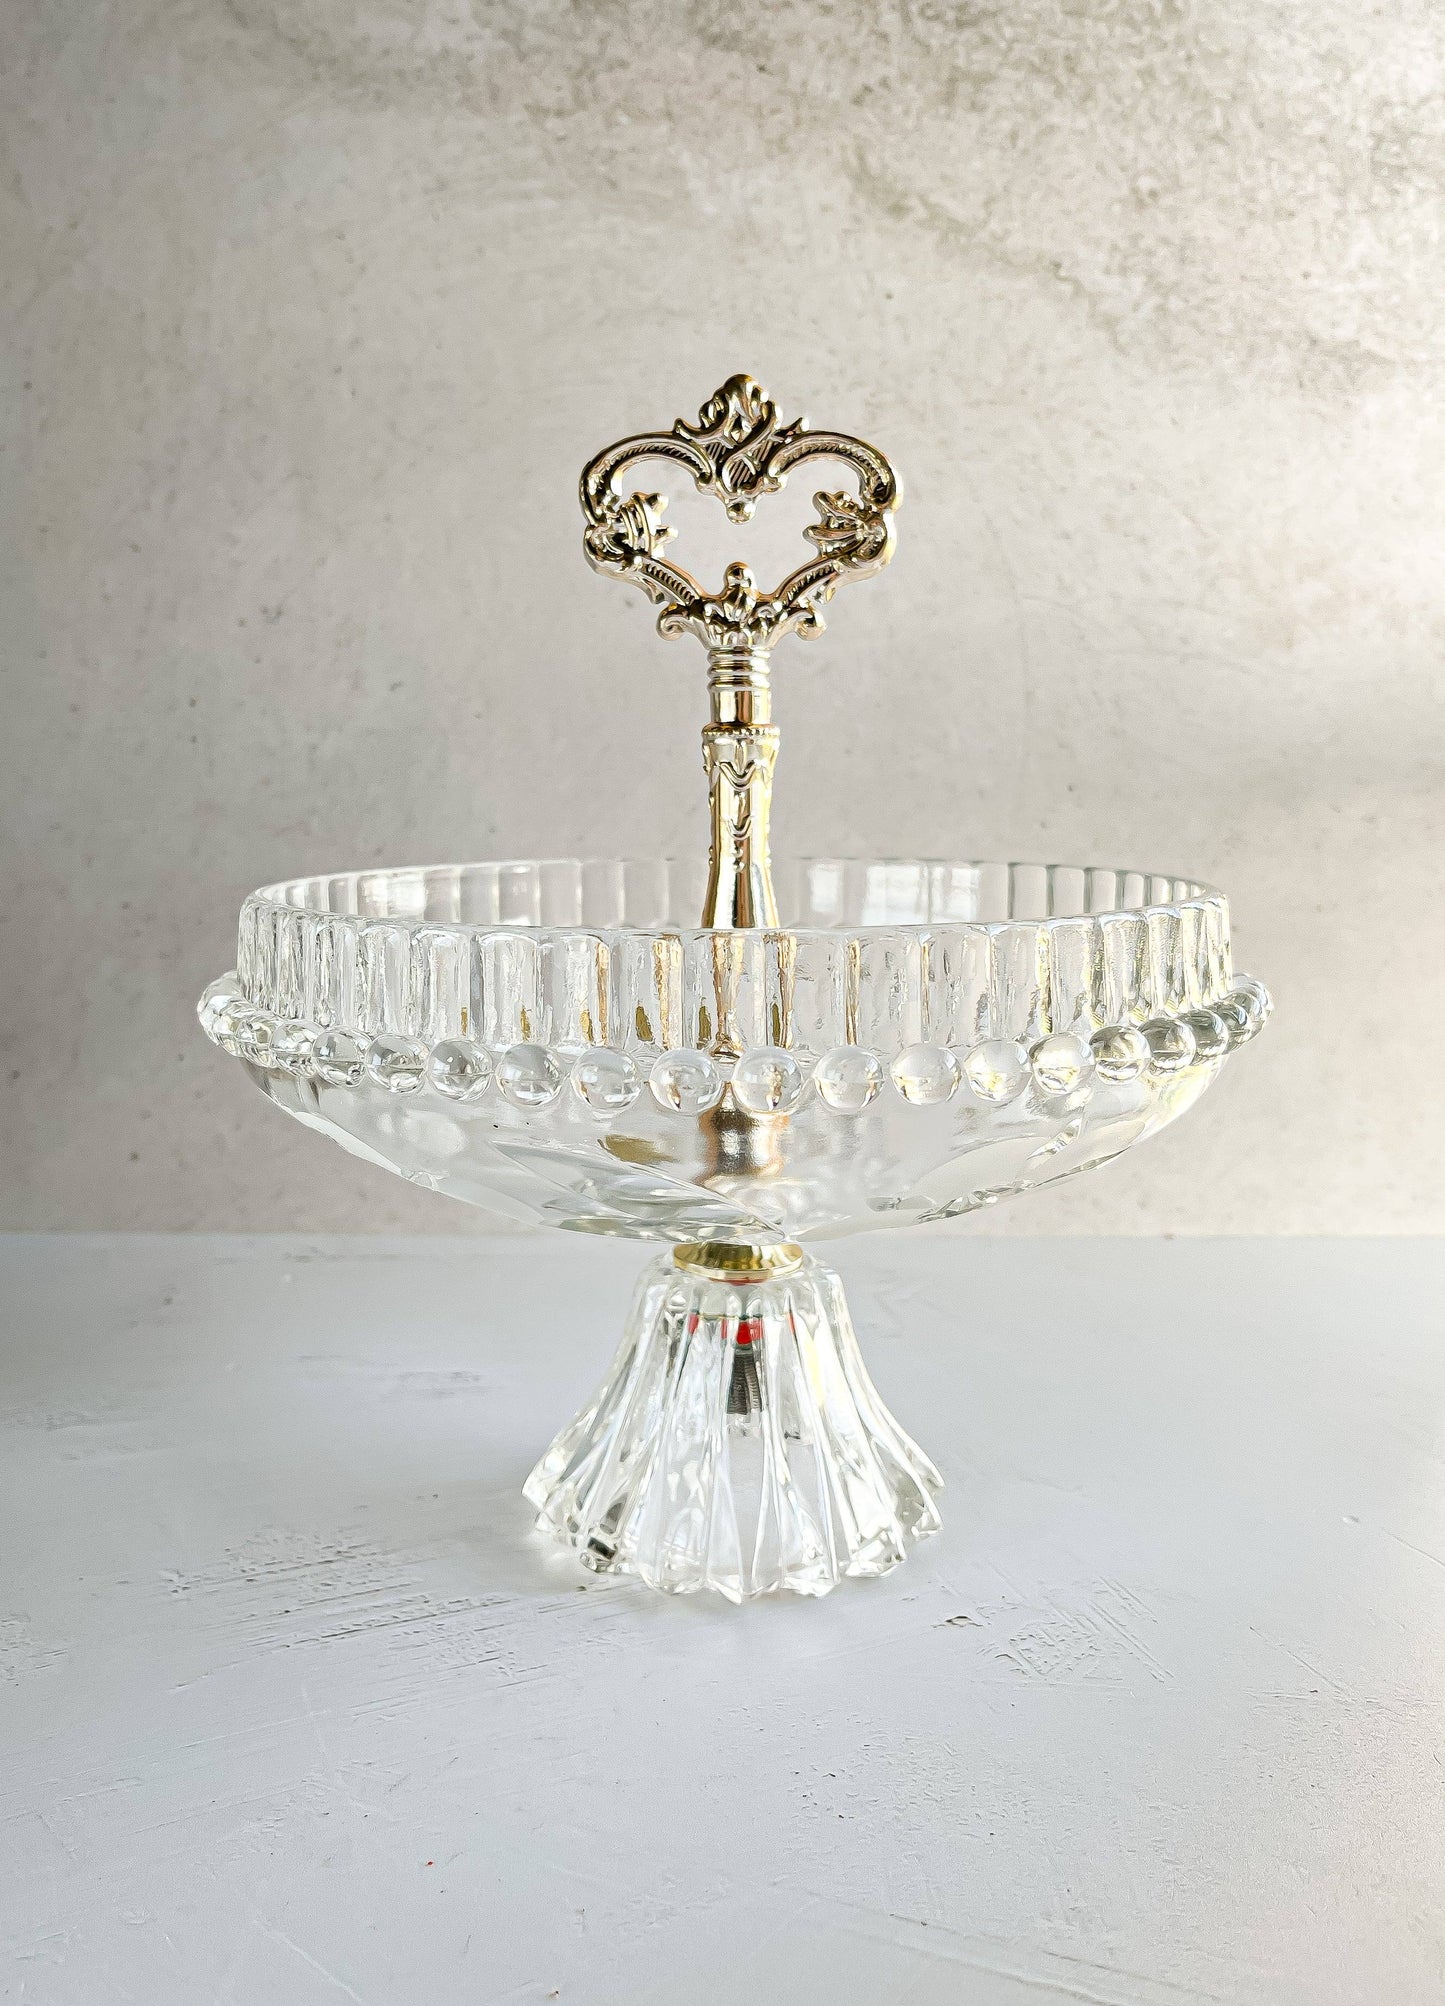 Hand-Cut Glass Centrepiece with Plastic Golden Accents - Made in Italy - SOSC Home